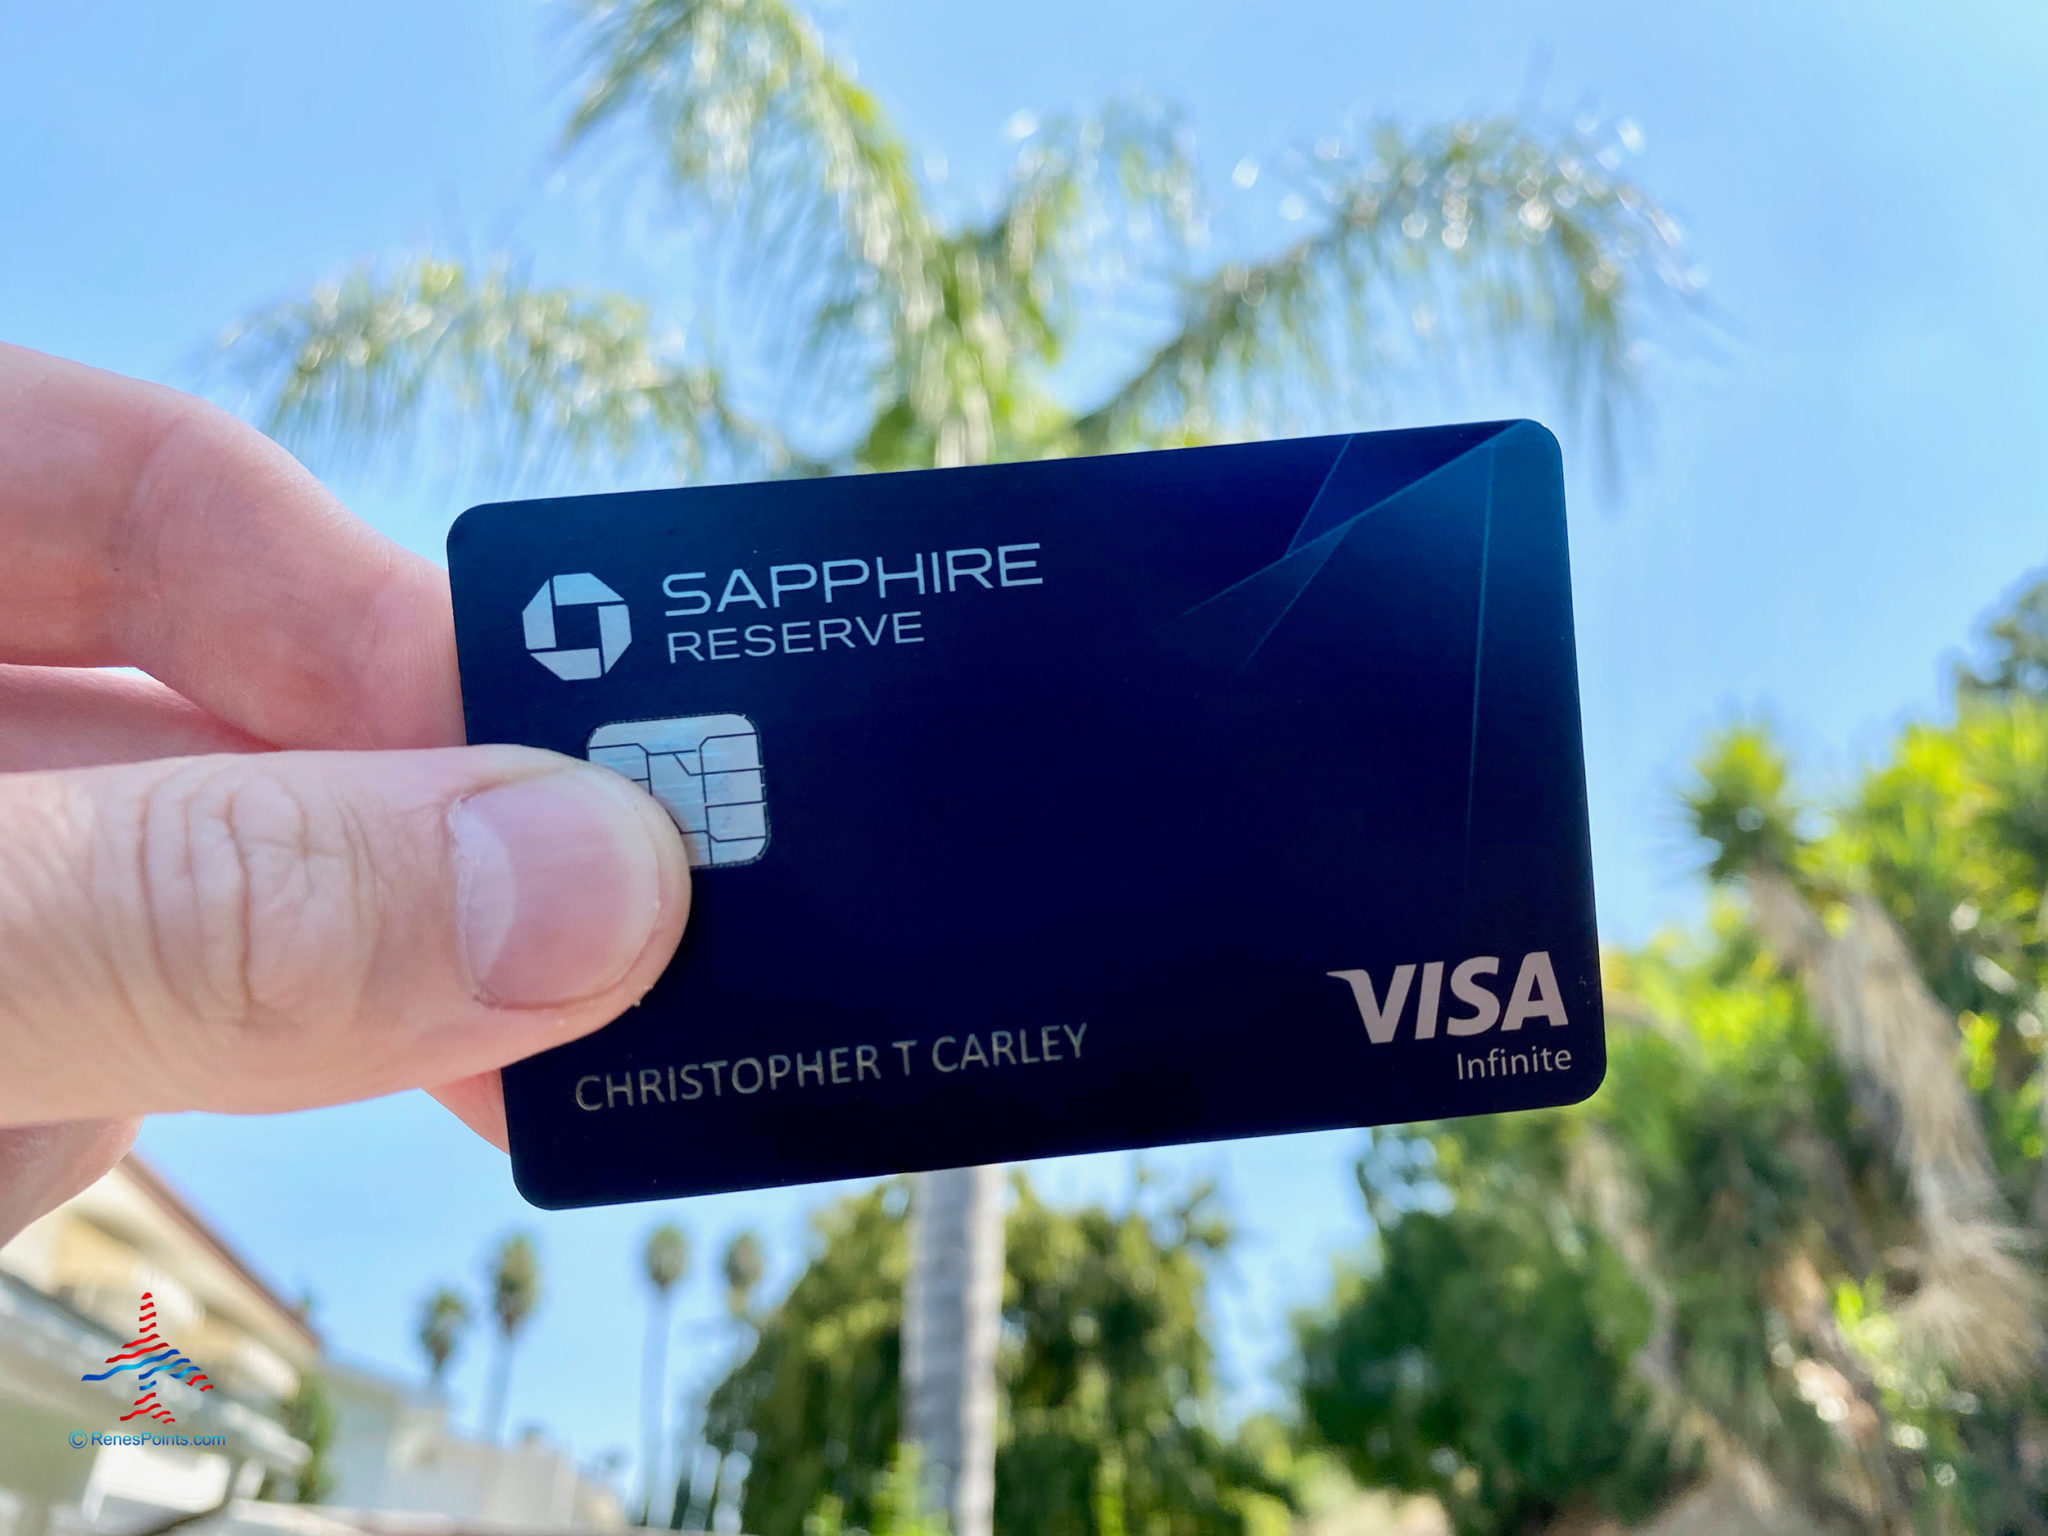 chase sapphire travel miles